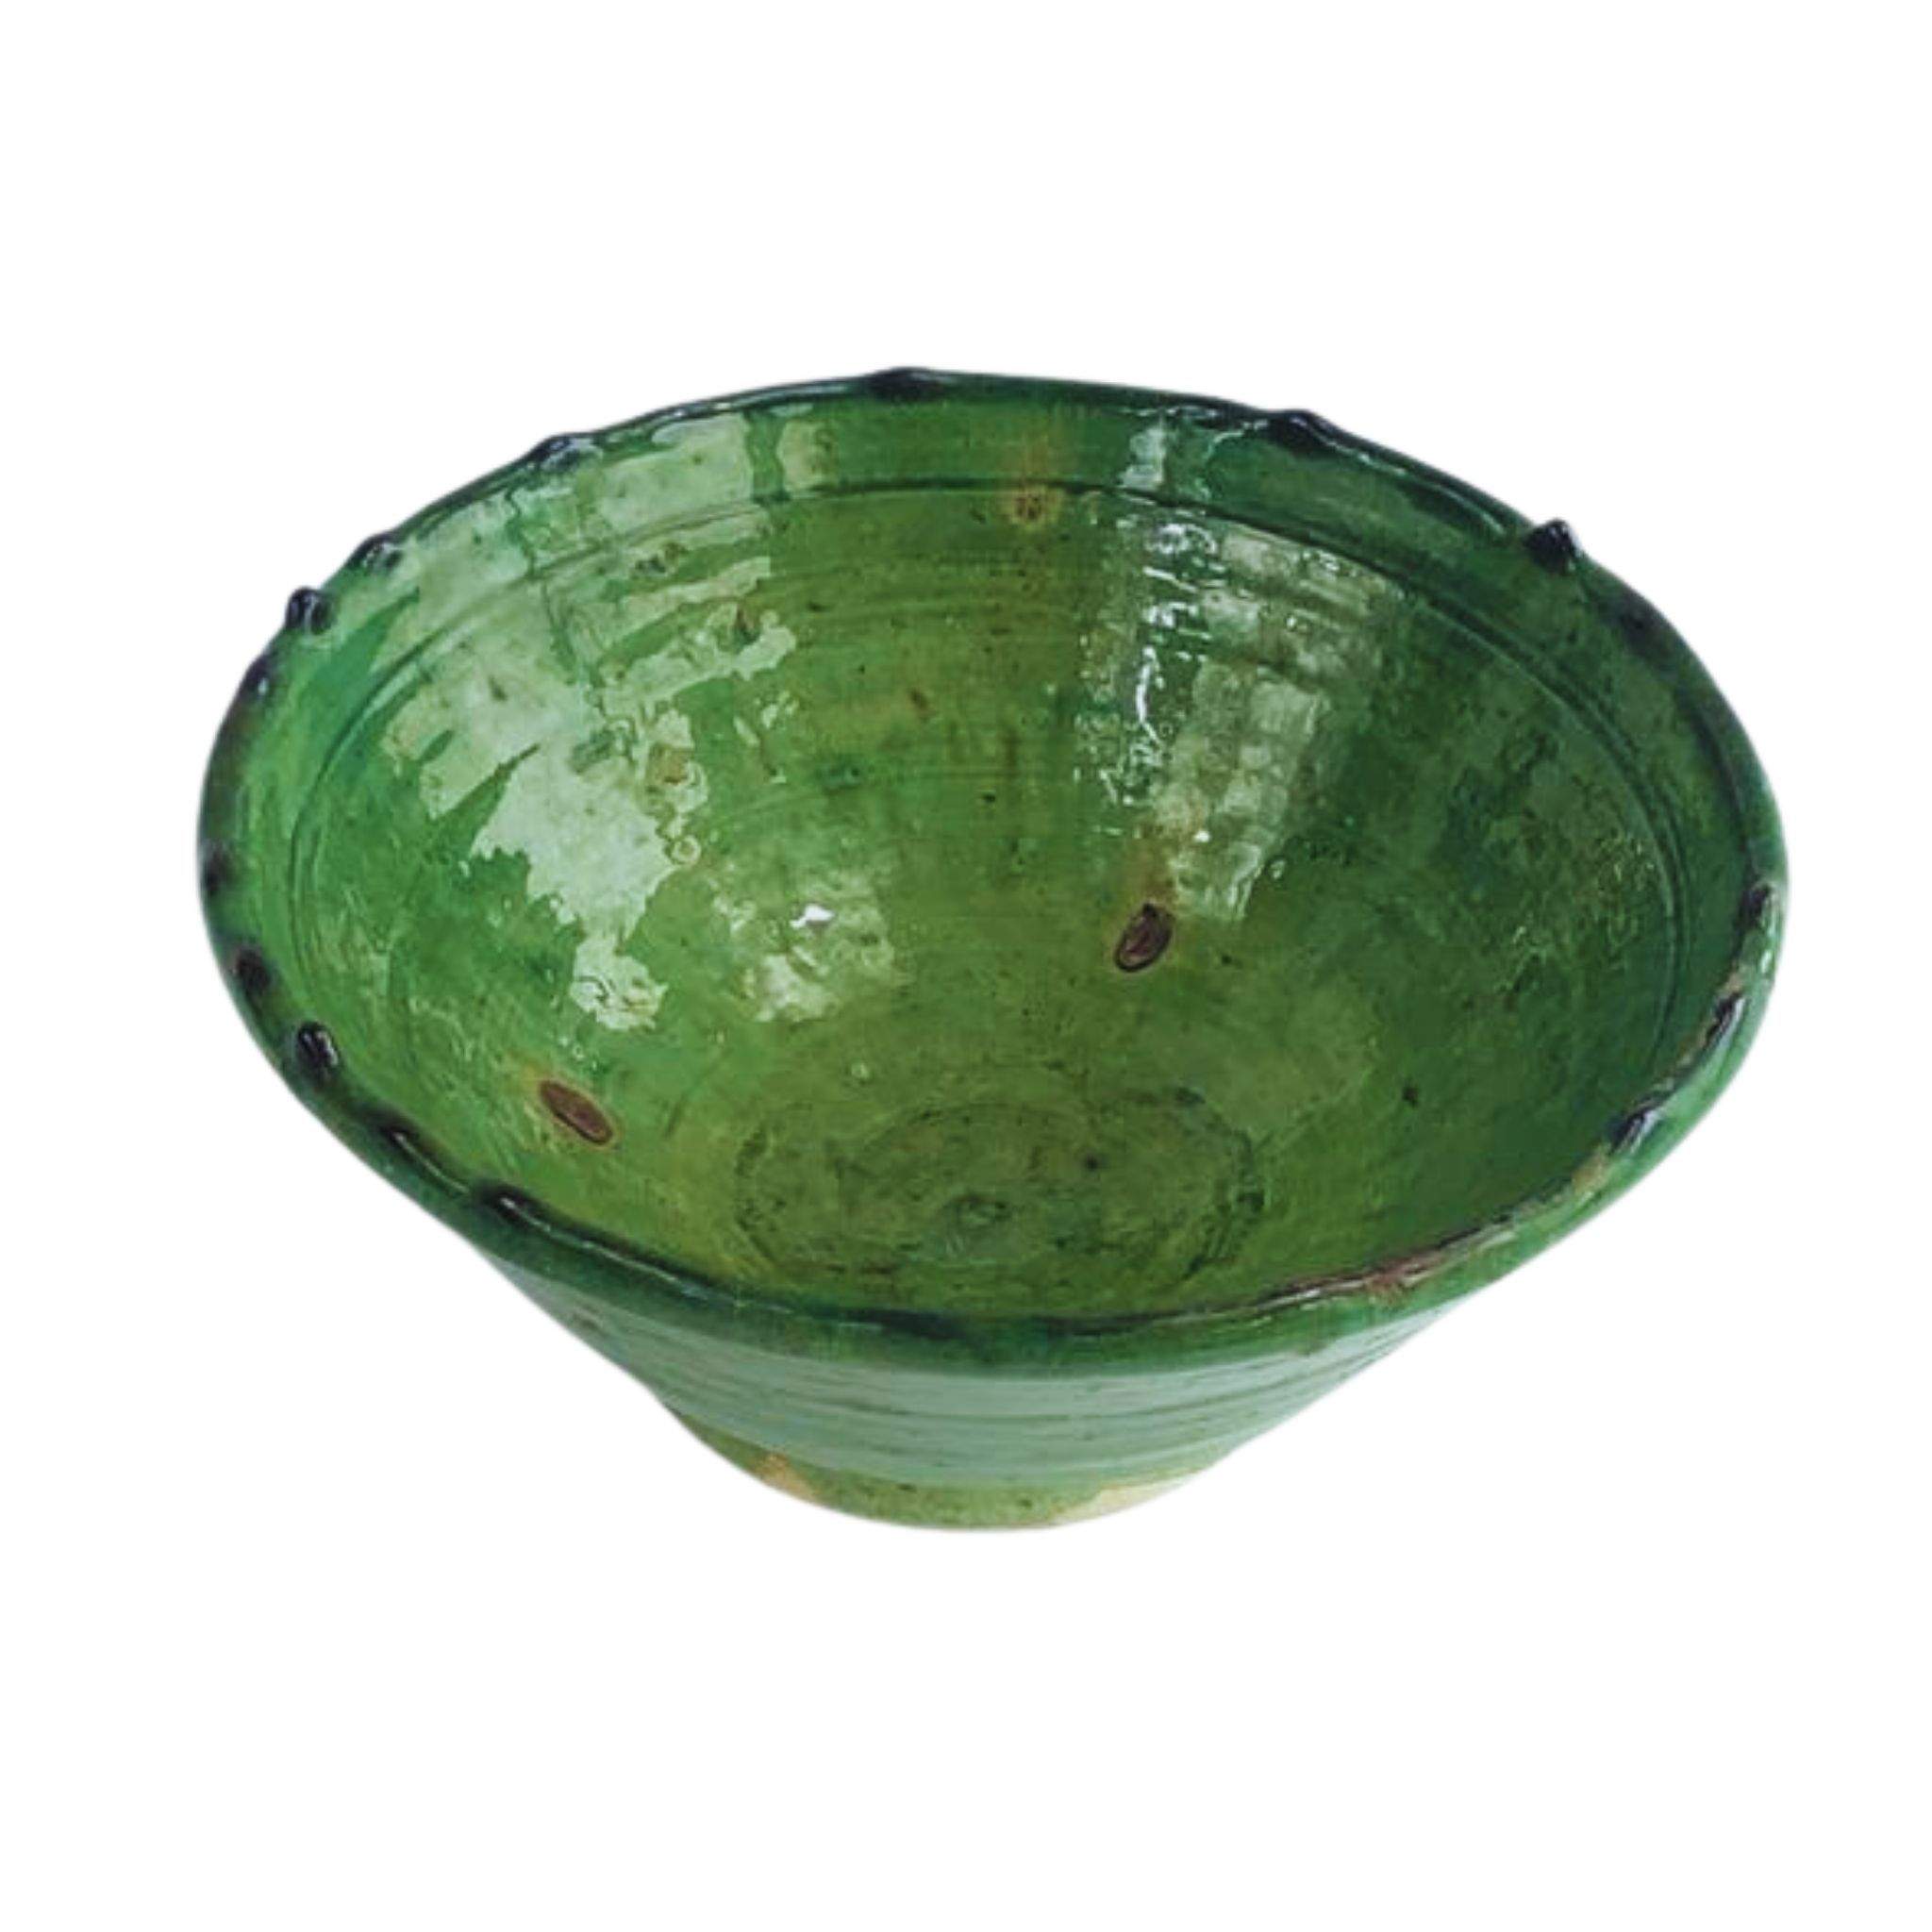 Tamegroute bowl-Artisan Traders-handcrafted,handmade,kitchen,morrocco,natural